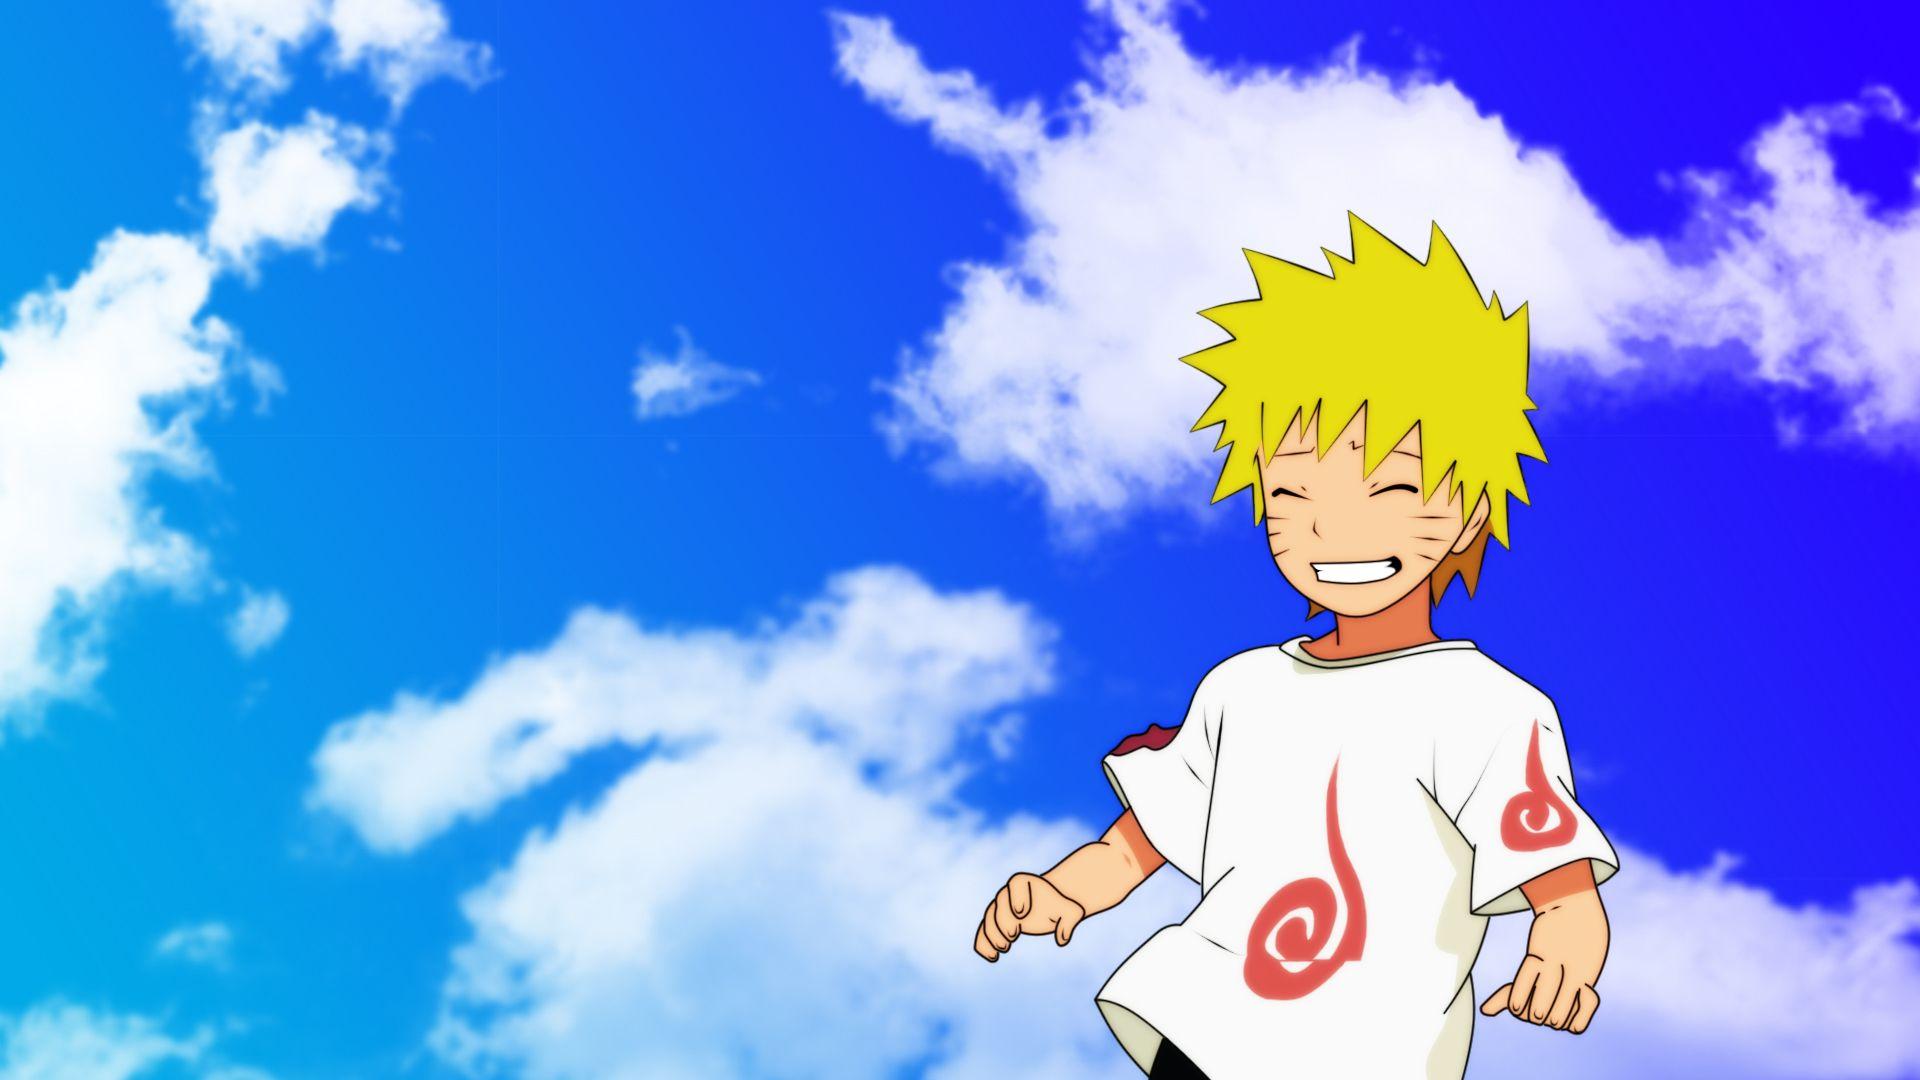 6 M on Twitter Wallpapers PCPS4 Naruto My hero Academia  httpstcoGSEl85itBE  Twitter